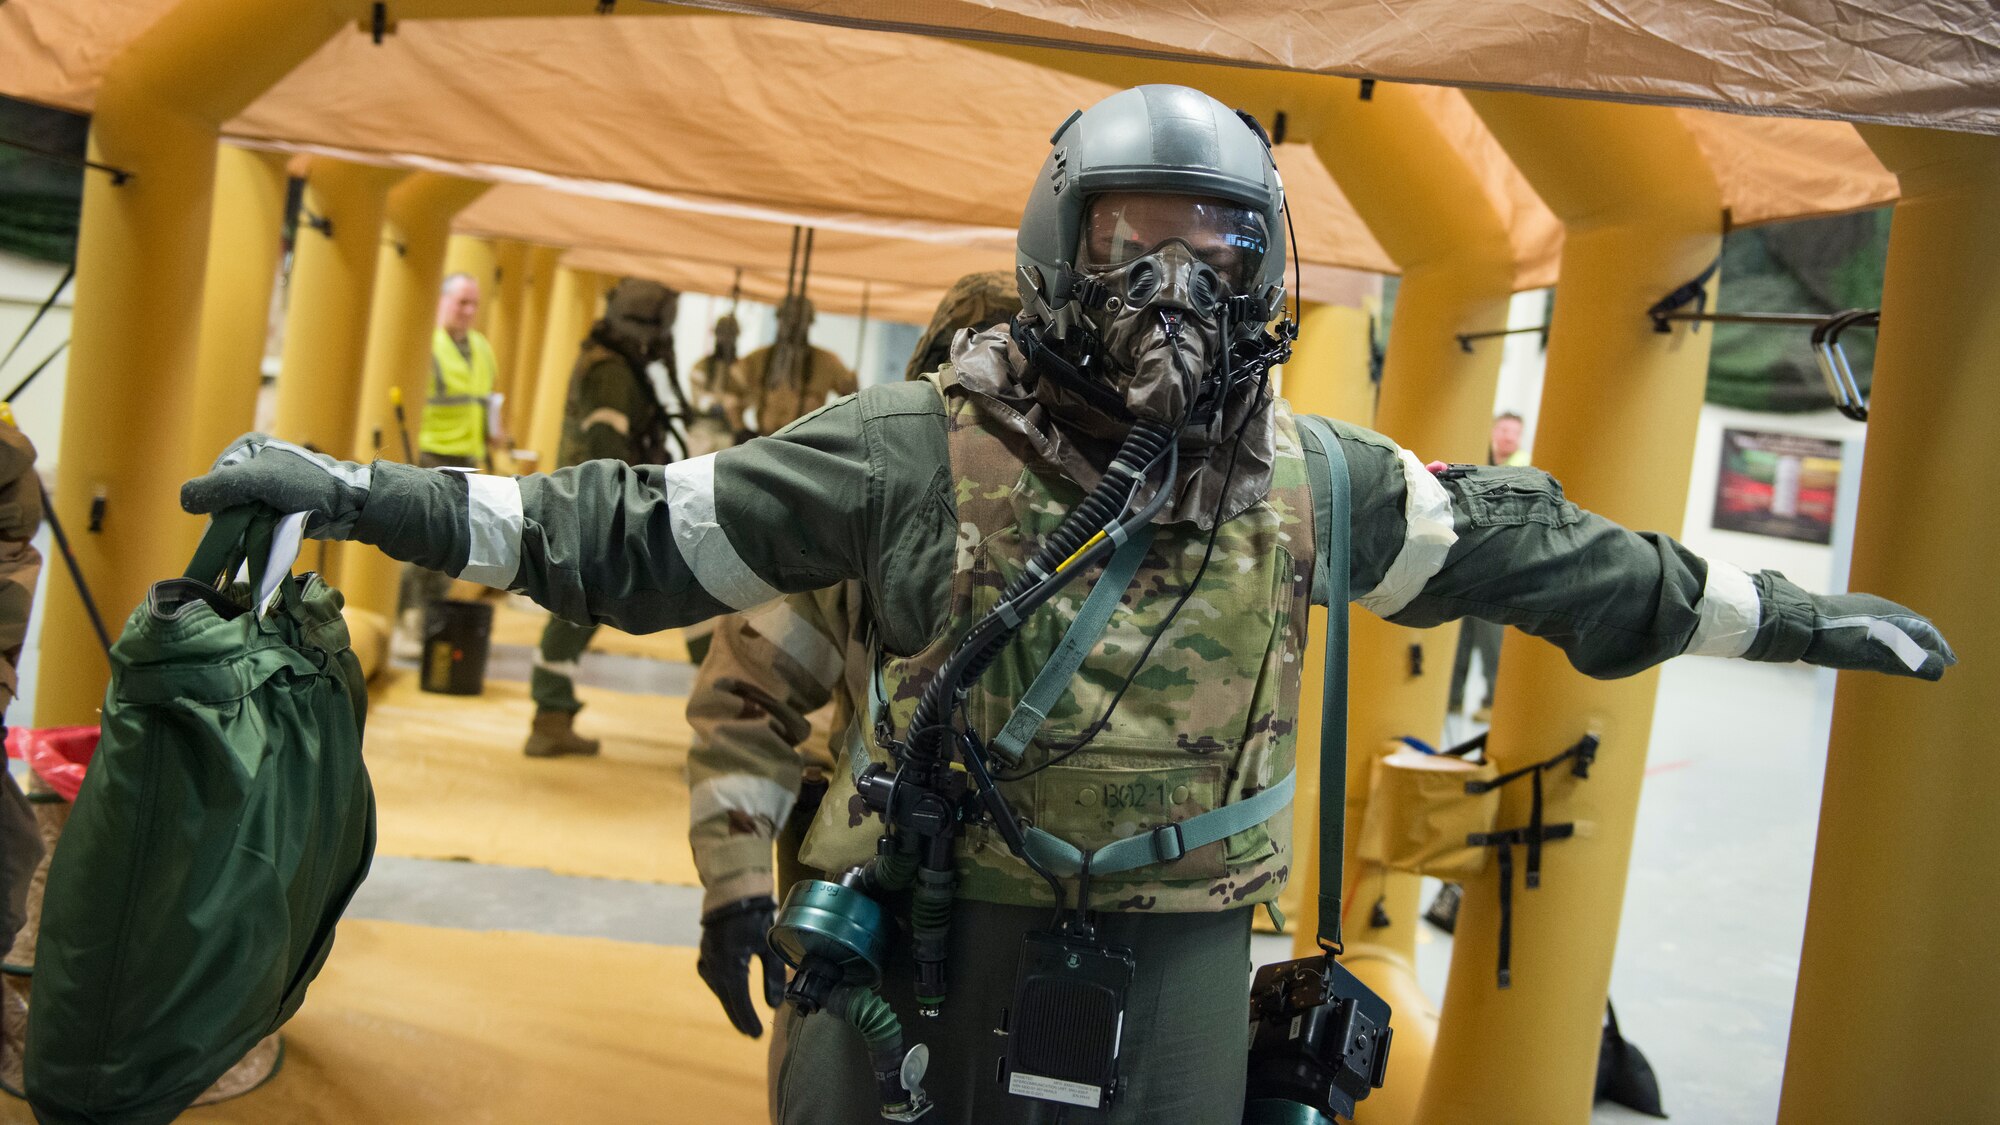 Tech. Sgt. Thomas Buckley, 118th Airlift Squadron loadmaster, is checked for contamination on his aircrew eye and respiratory protection system (AERPS) equipment during a large-scale readiness exercise at Bradley Air National Guard Base, East Granby, Conn. March 5, 2020. The exercise tested the 103rd Airlift Wing’s ability to deploy to and sustain in a contested environment. (U.S. Air National Guard photo by Staff Sgt. Steven Tucker)